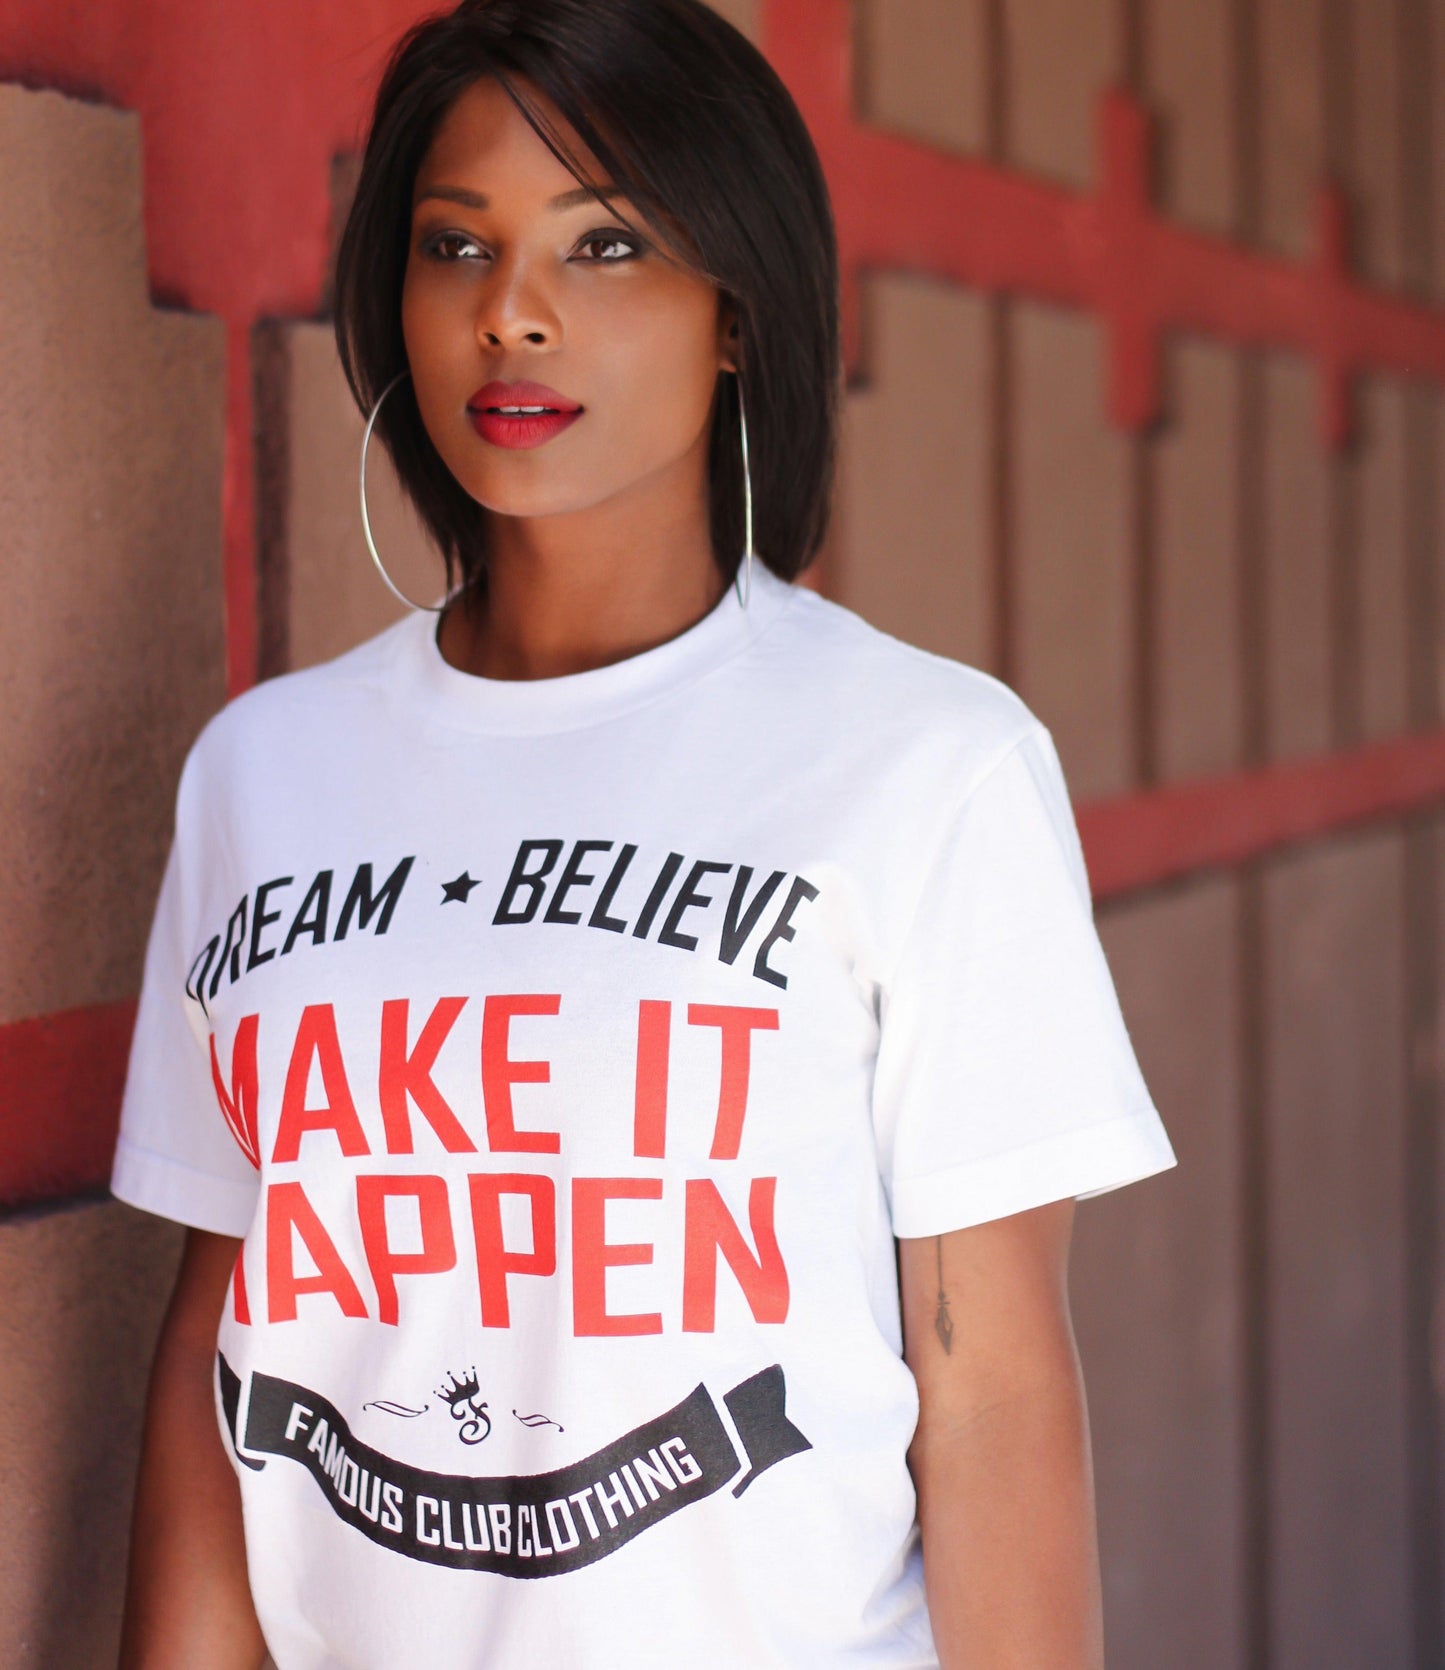 DREAM BELIEVE T-SHIRT (WHITE) - Famous Club Clothing